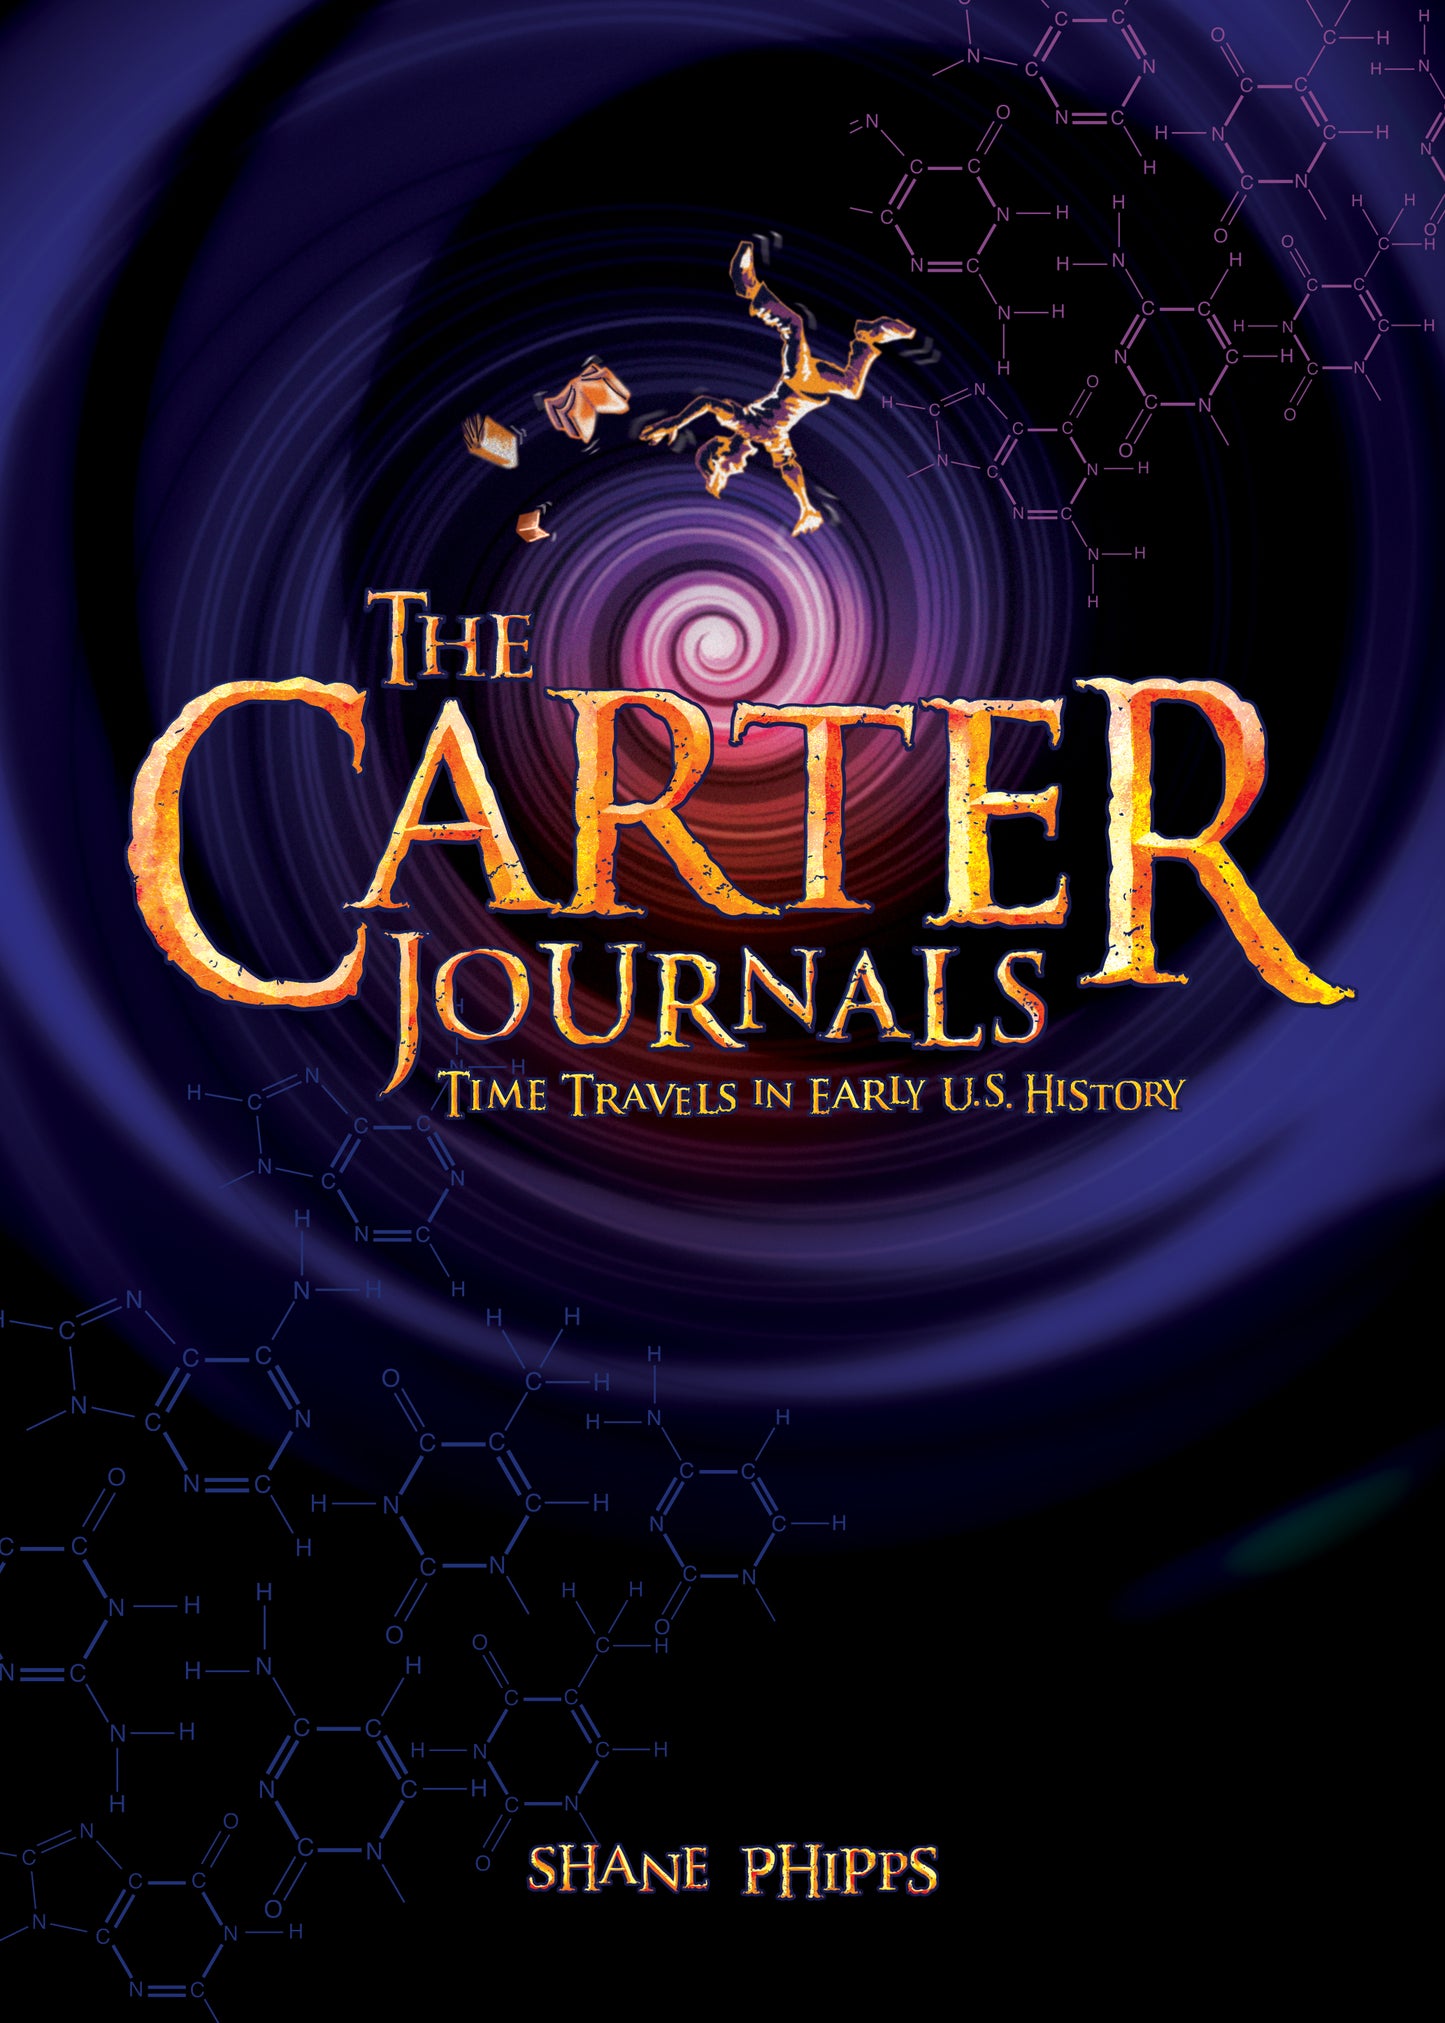 The Carter Journals: Time Travels in Early U.S. History Paper